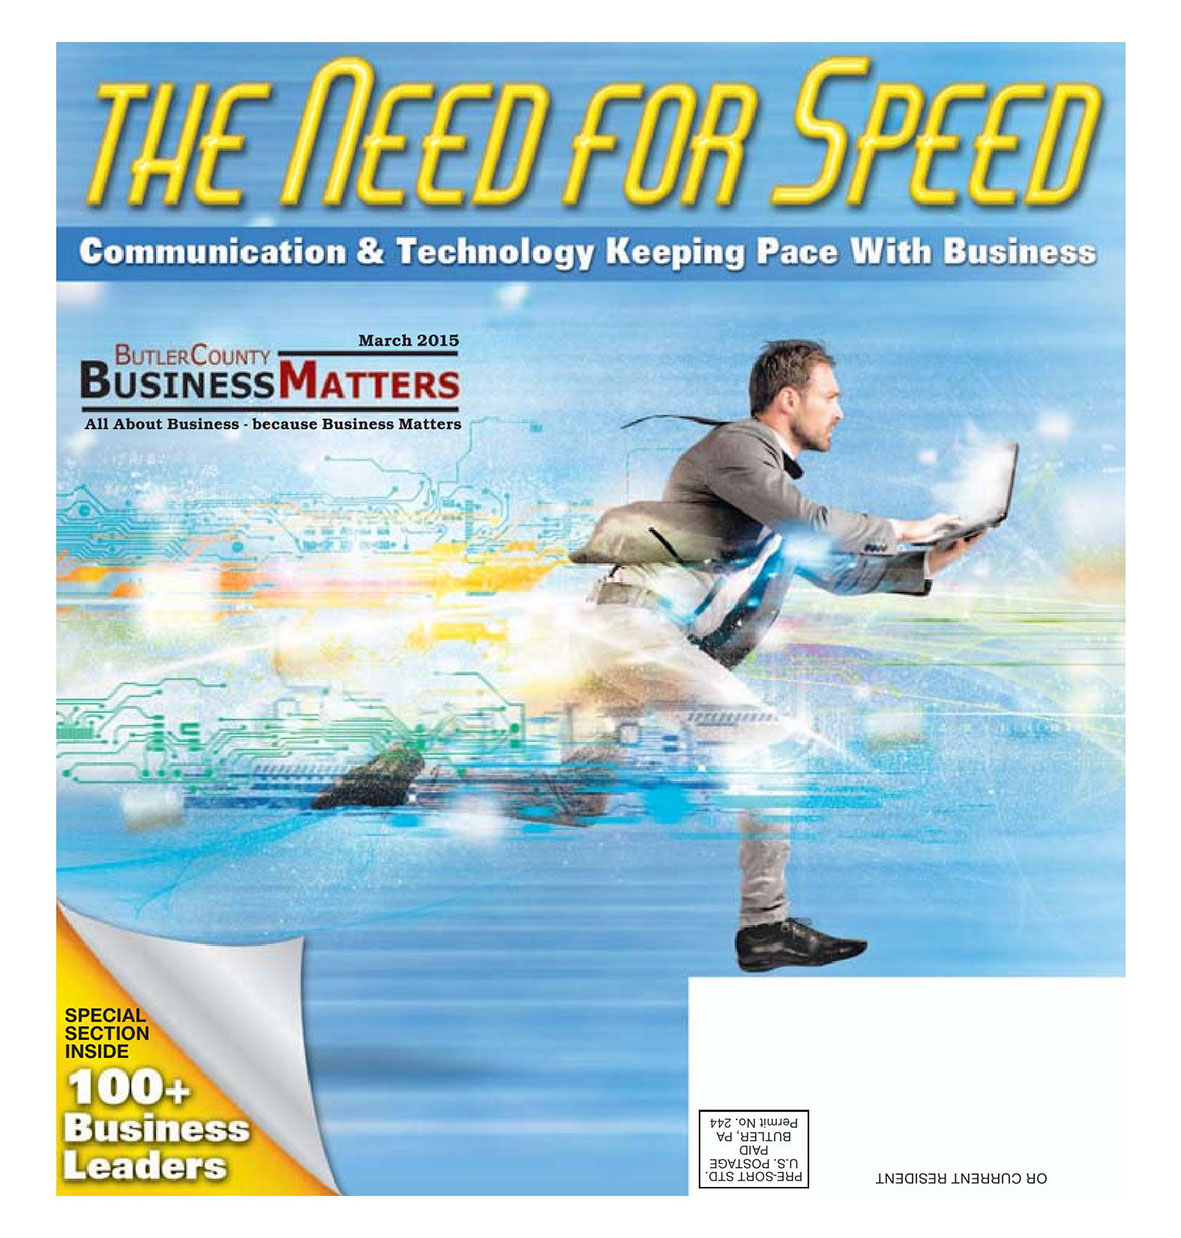 March 2015 - The Need For Speed - Communication & Technology Keeping Pace with Business